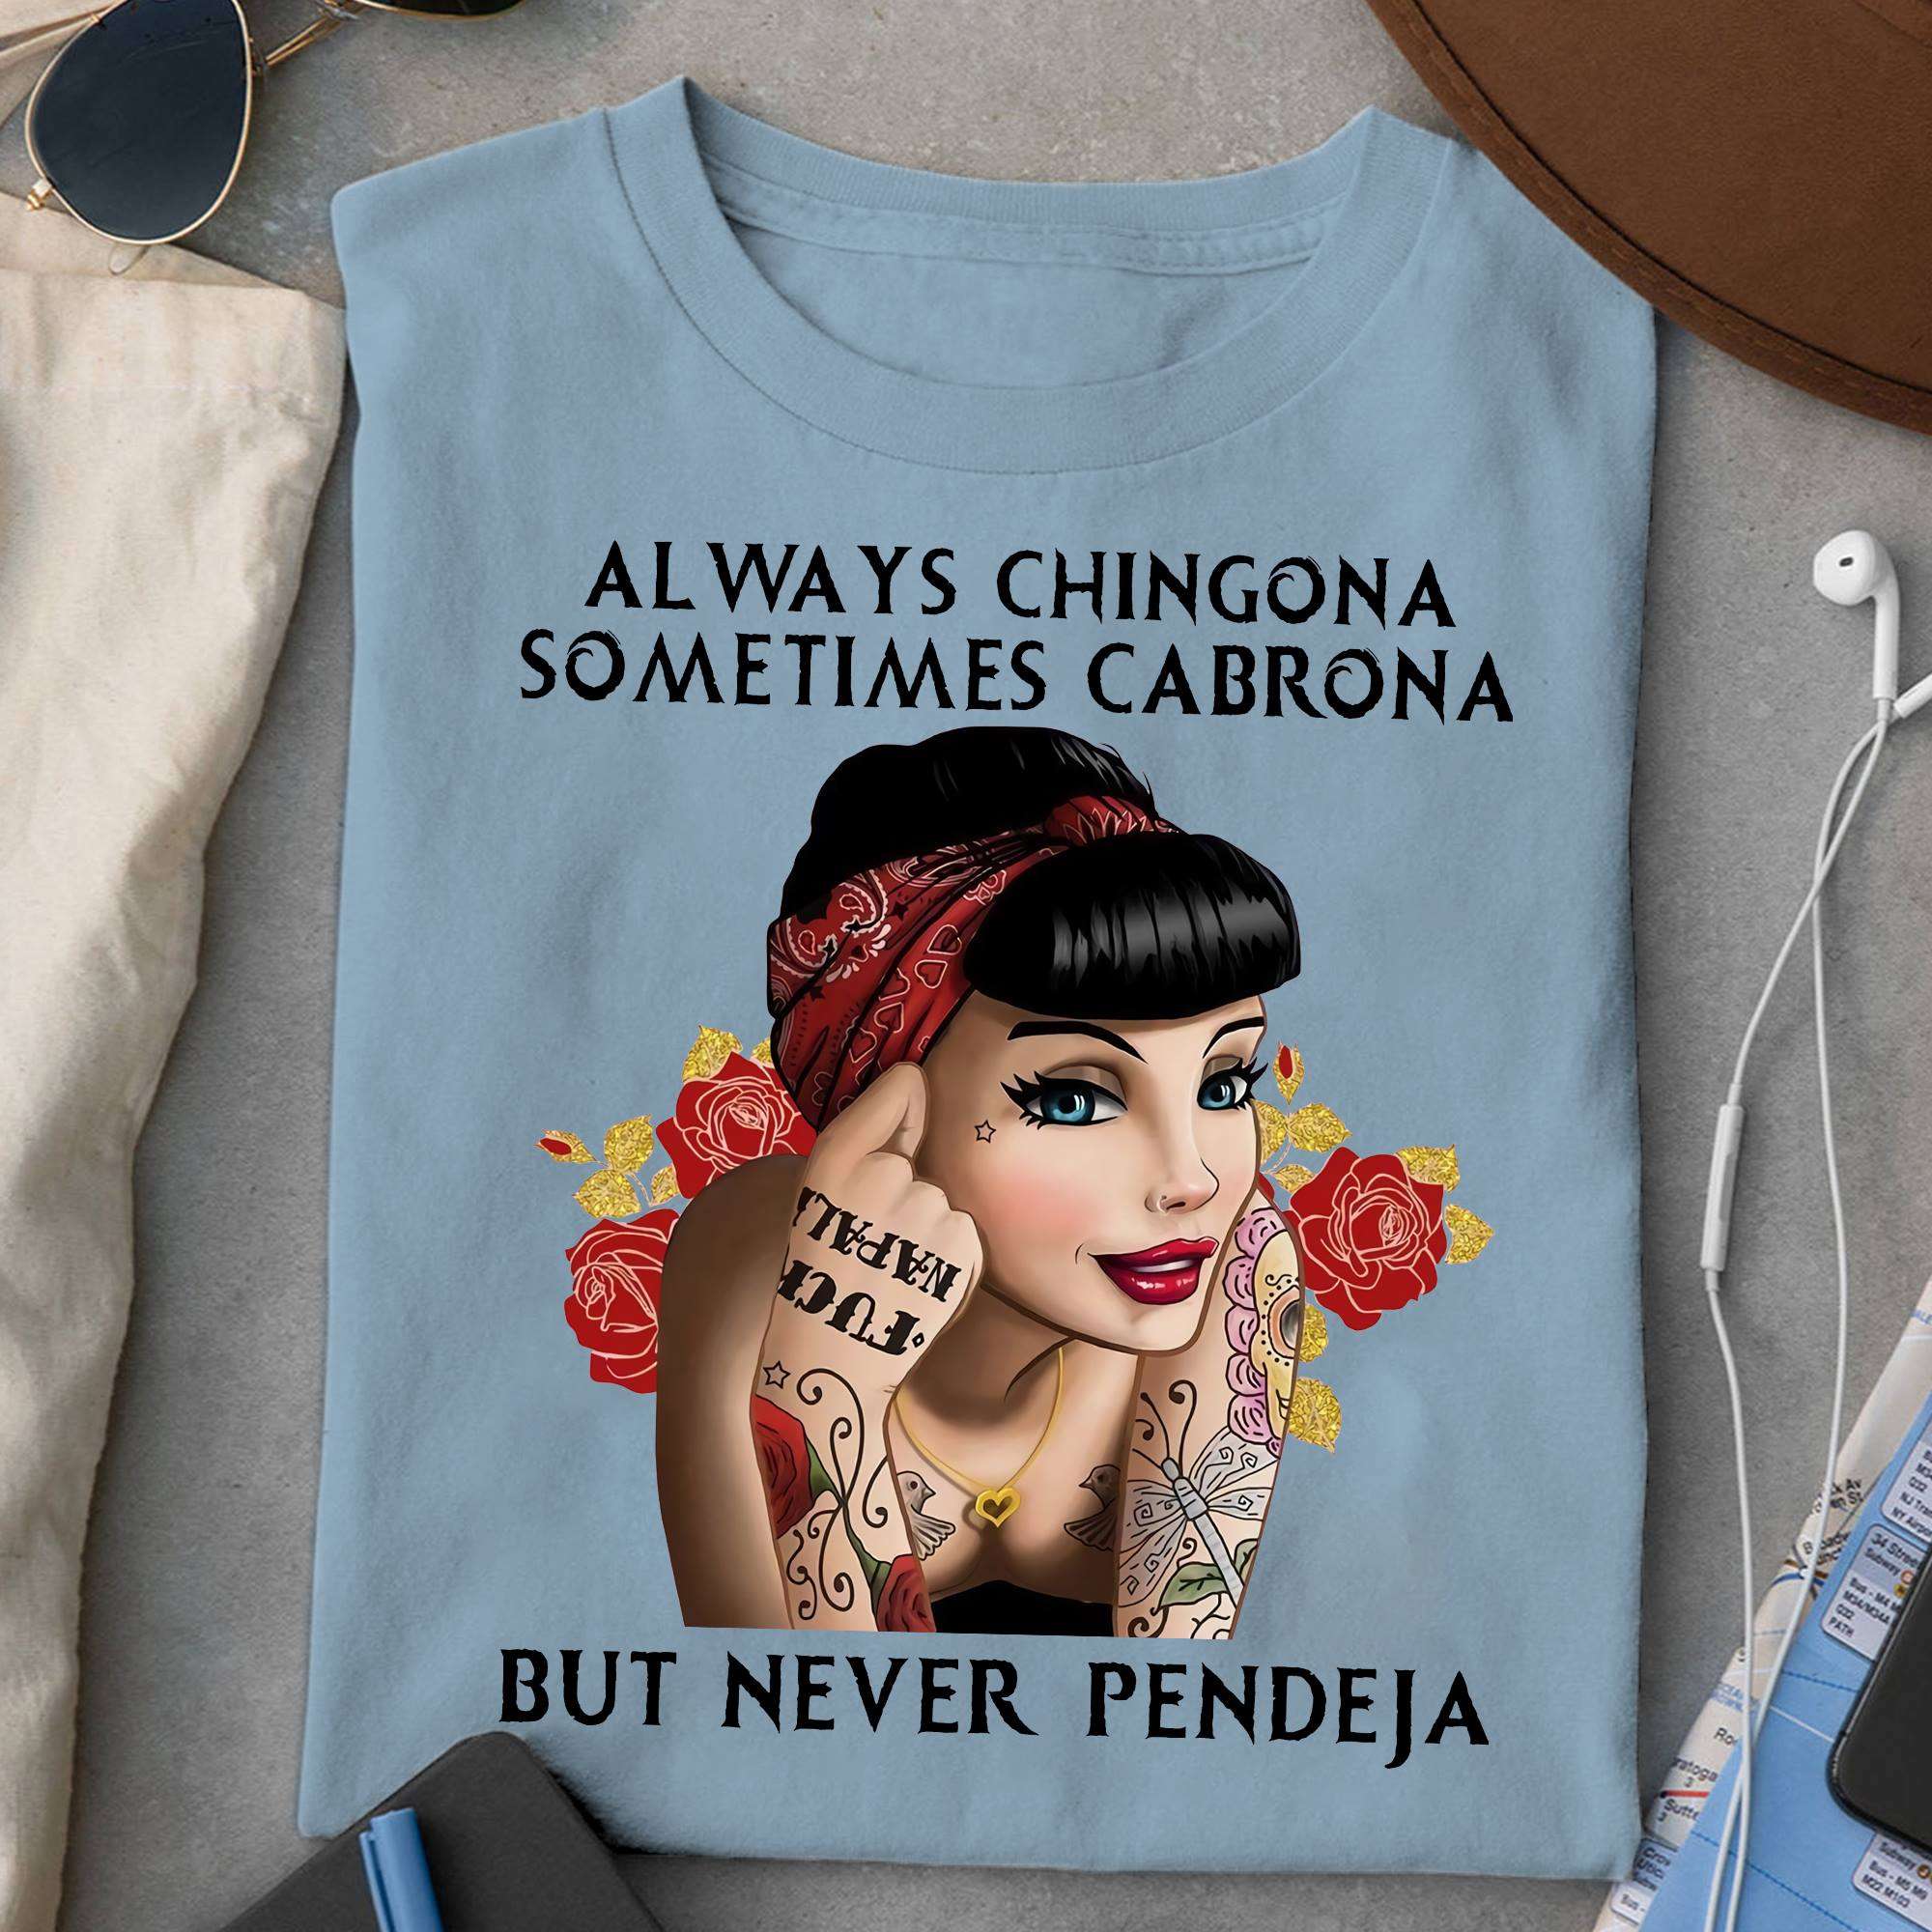 Always Chingona sometimes Cabrona but never Pendeja - Mexican woman